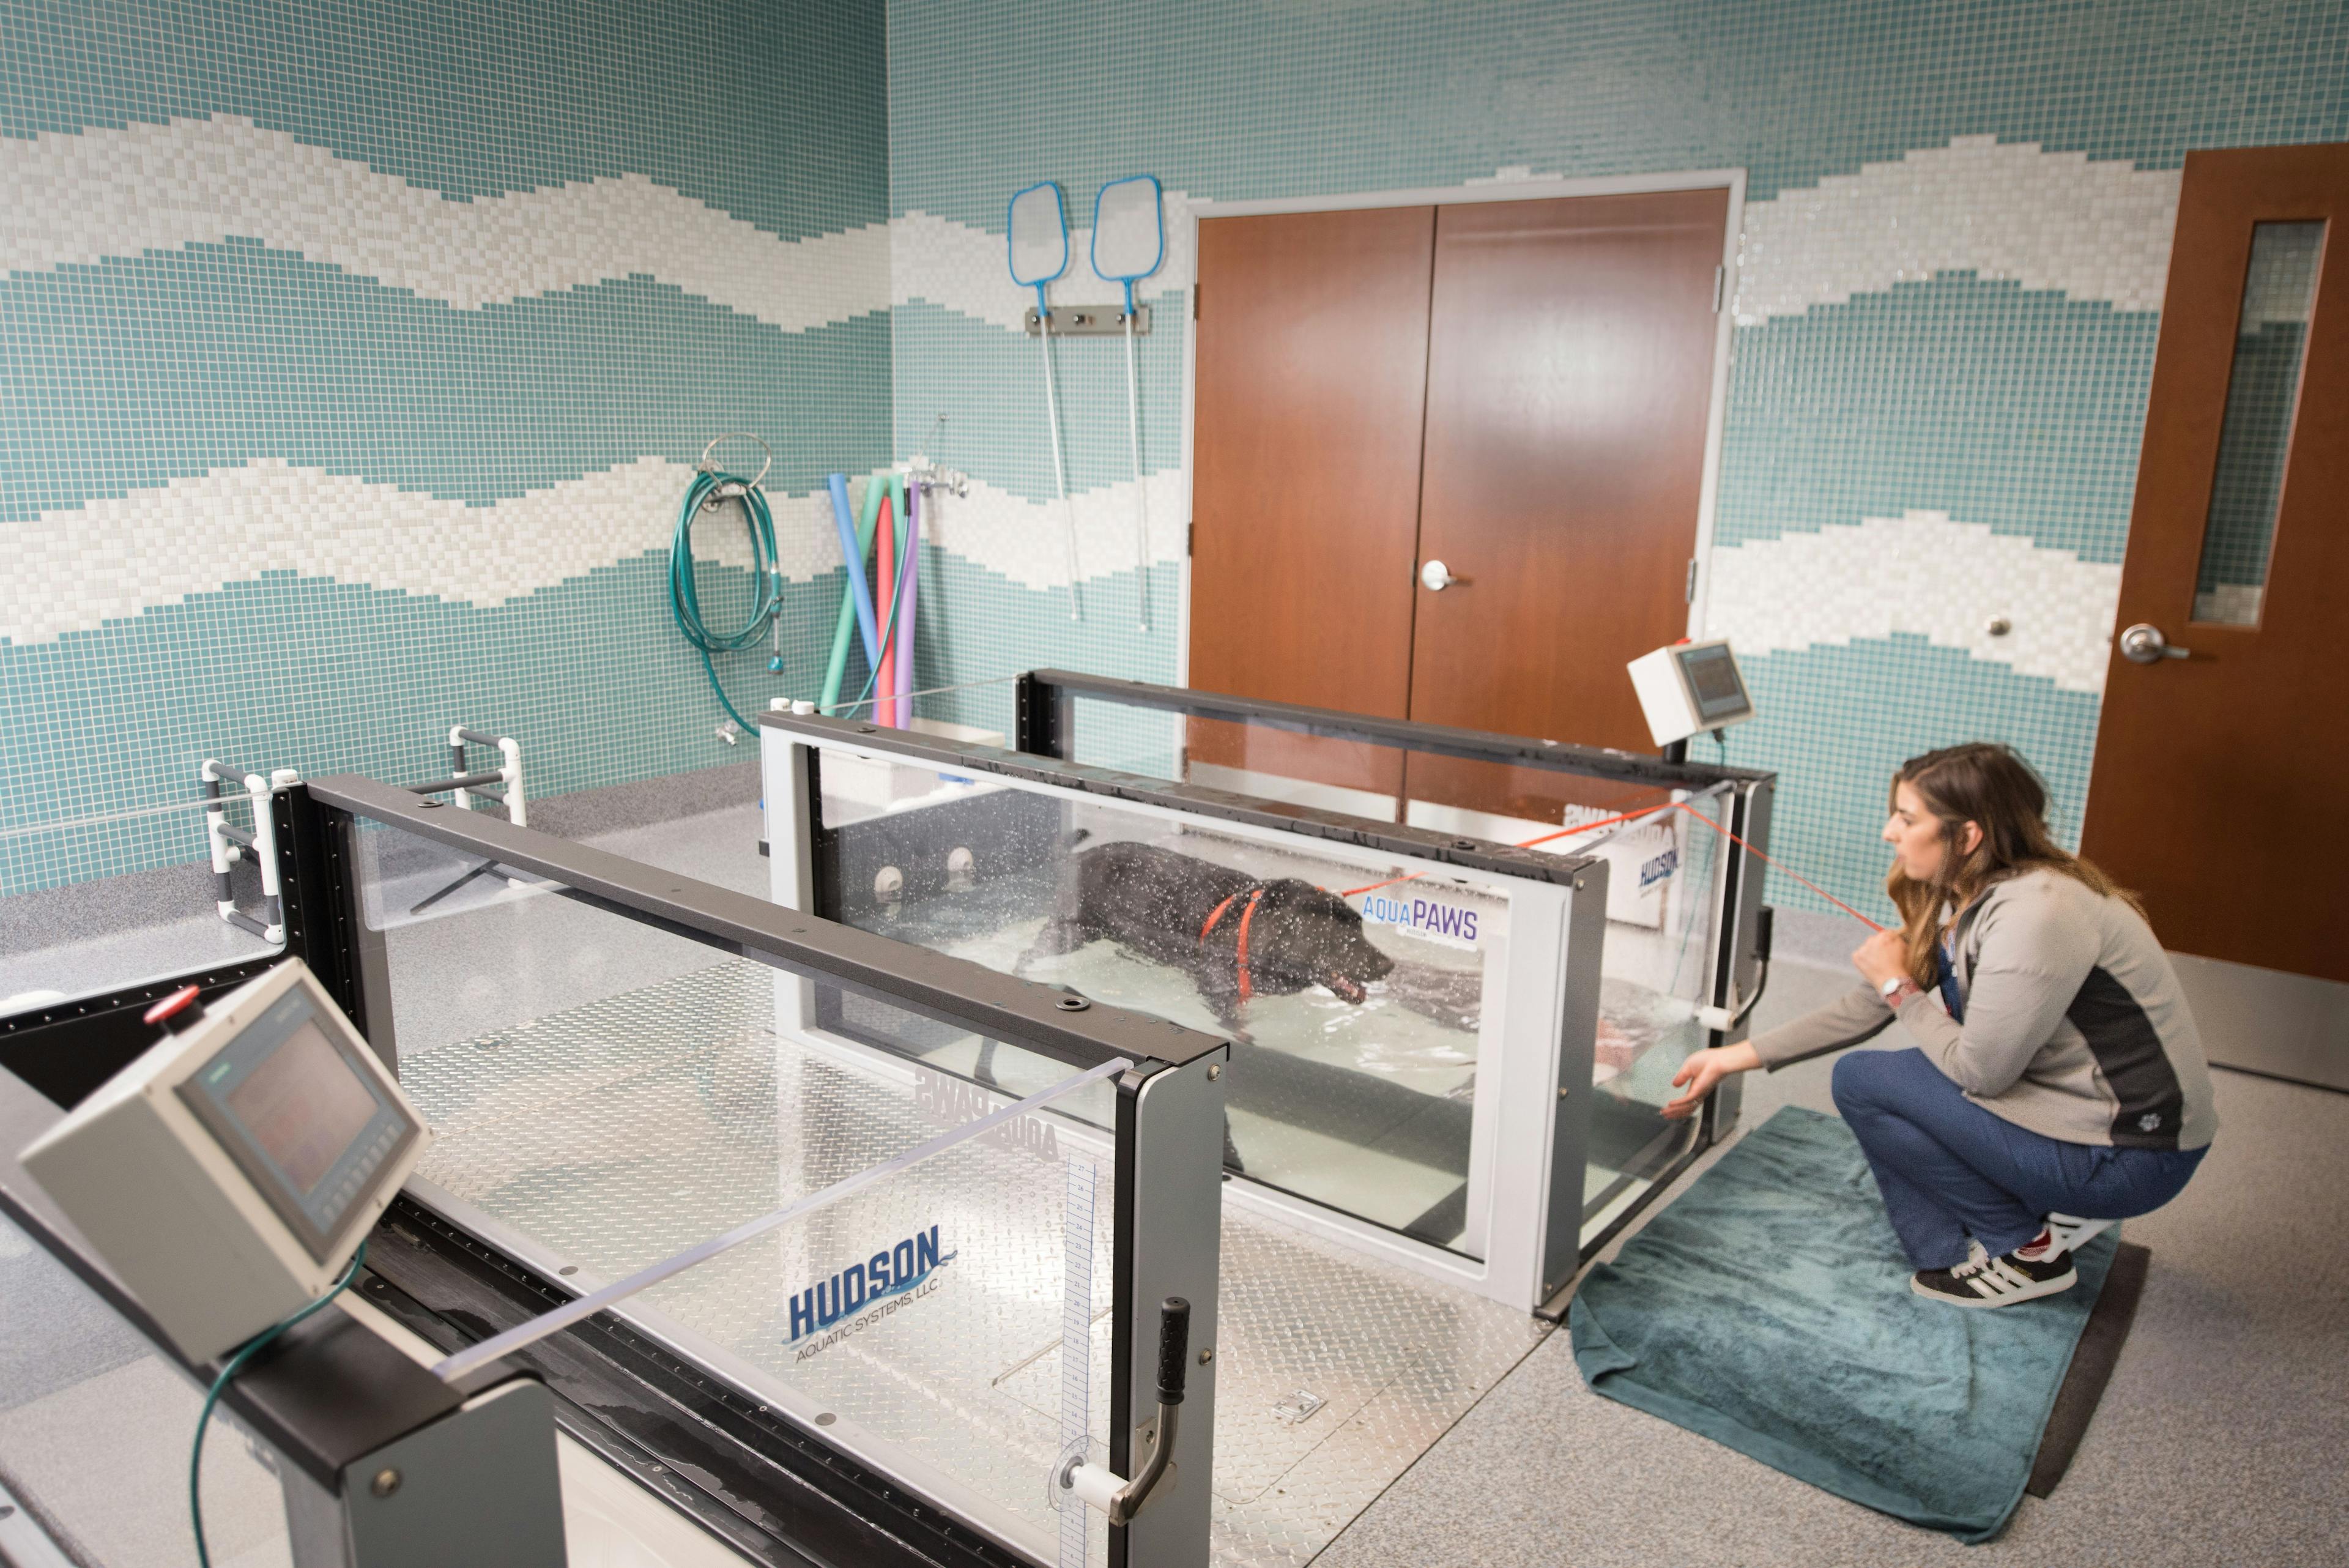 The rehabilitation room features a water treadmill, and a wave motif on the tile walls.